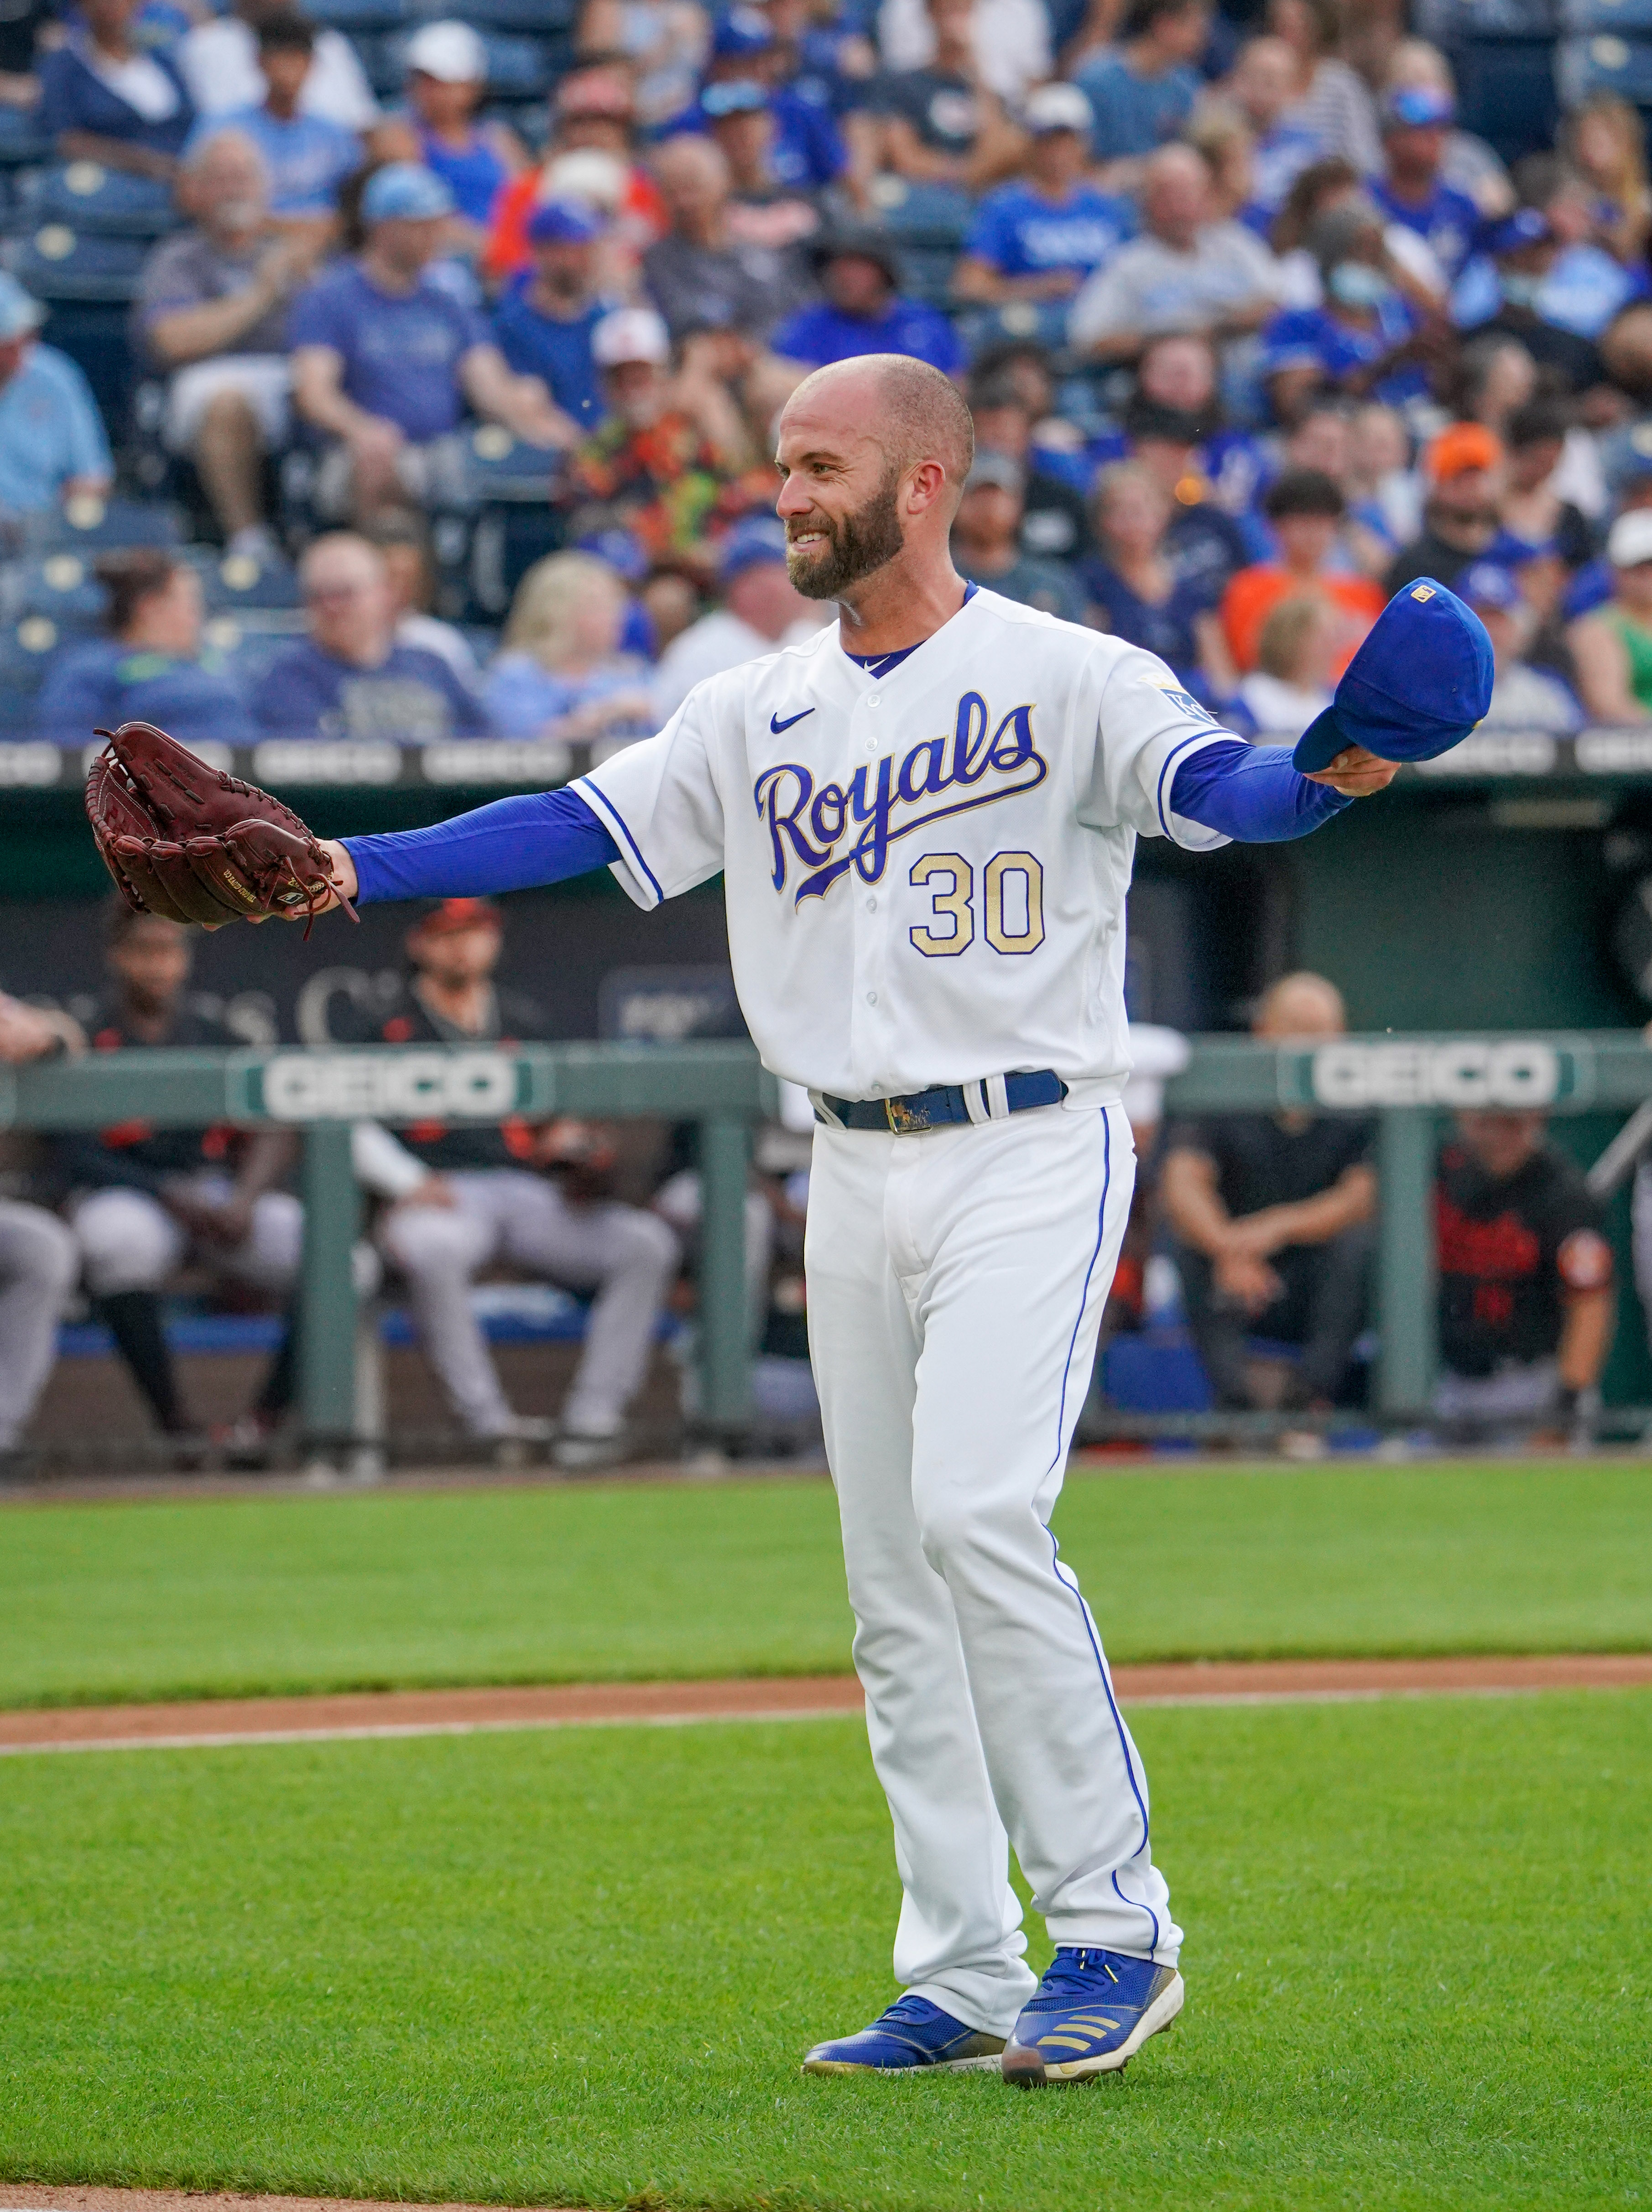 Kansas City Royals starting pitcher Danny Duffy (30) walks toward umpires to have his hat and glove inspected in between innings during the game against the Baltimore Orioles at Kauffman Stadium.